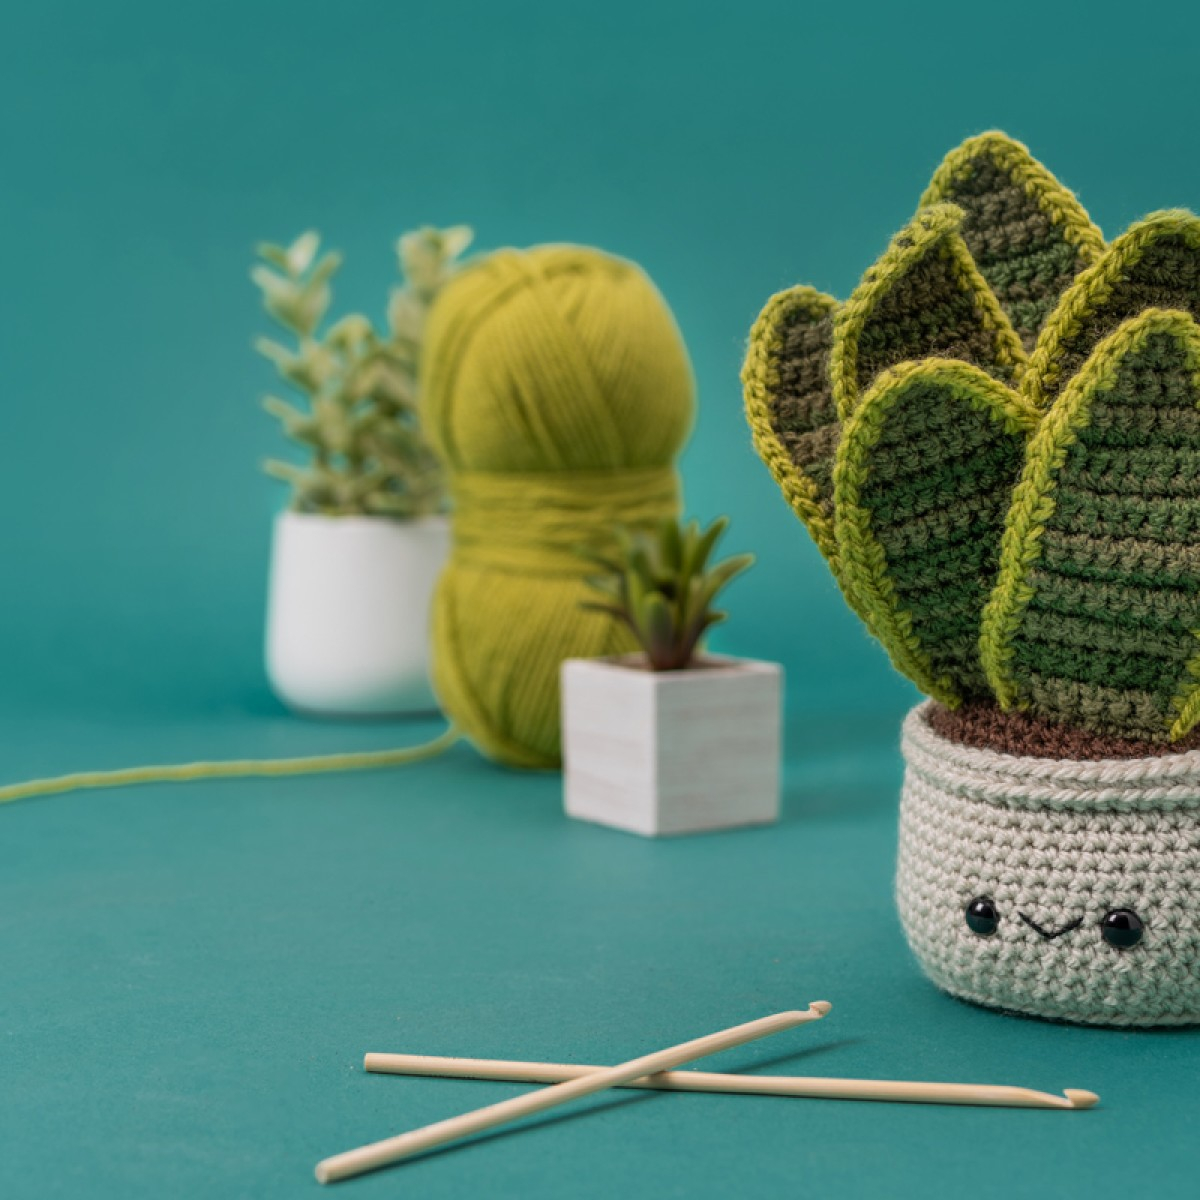 Free Crochet Pot Leaf Pattern for Making Decorations Crochet An Amigurumi Snake Plant No Green Thumb Required